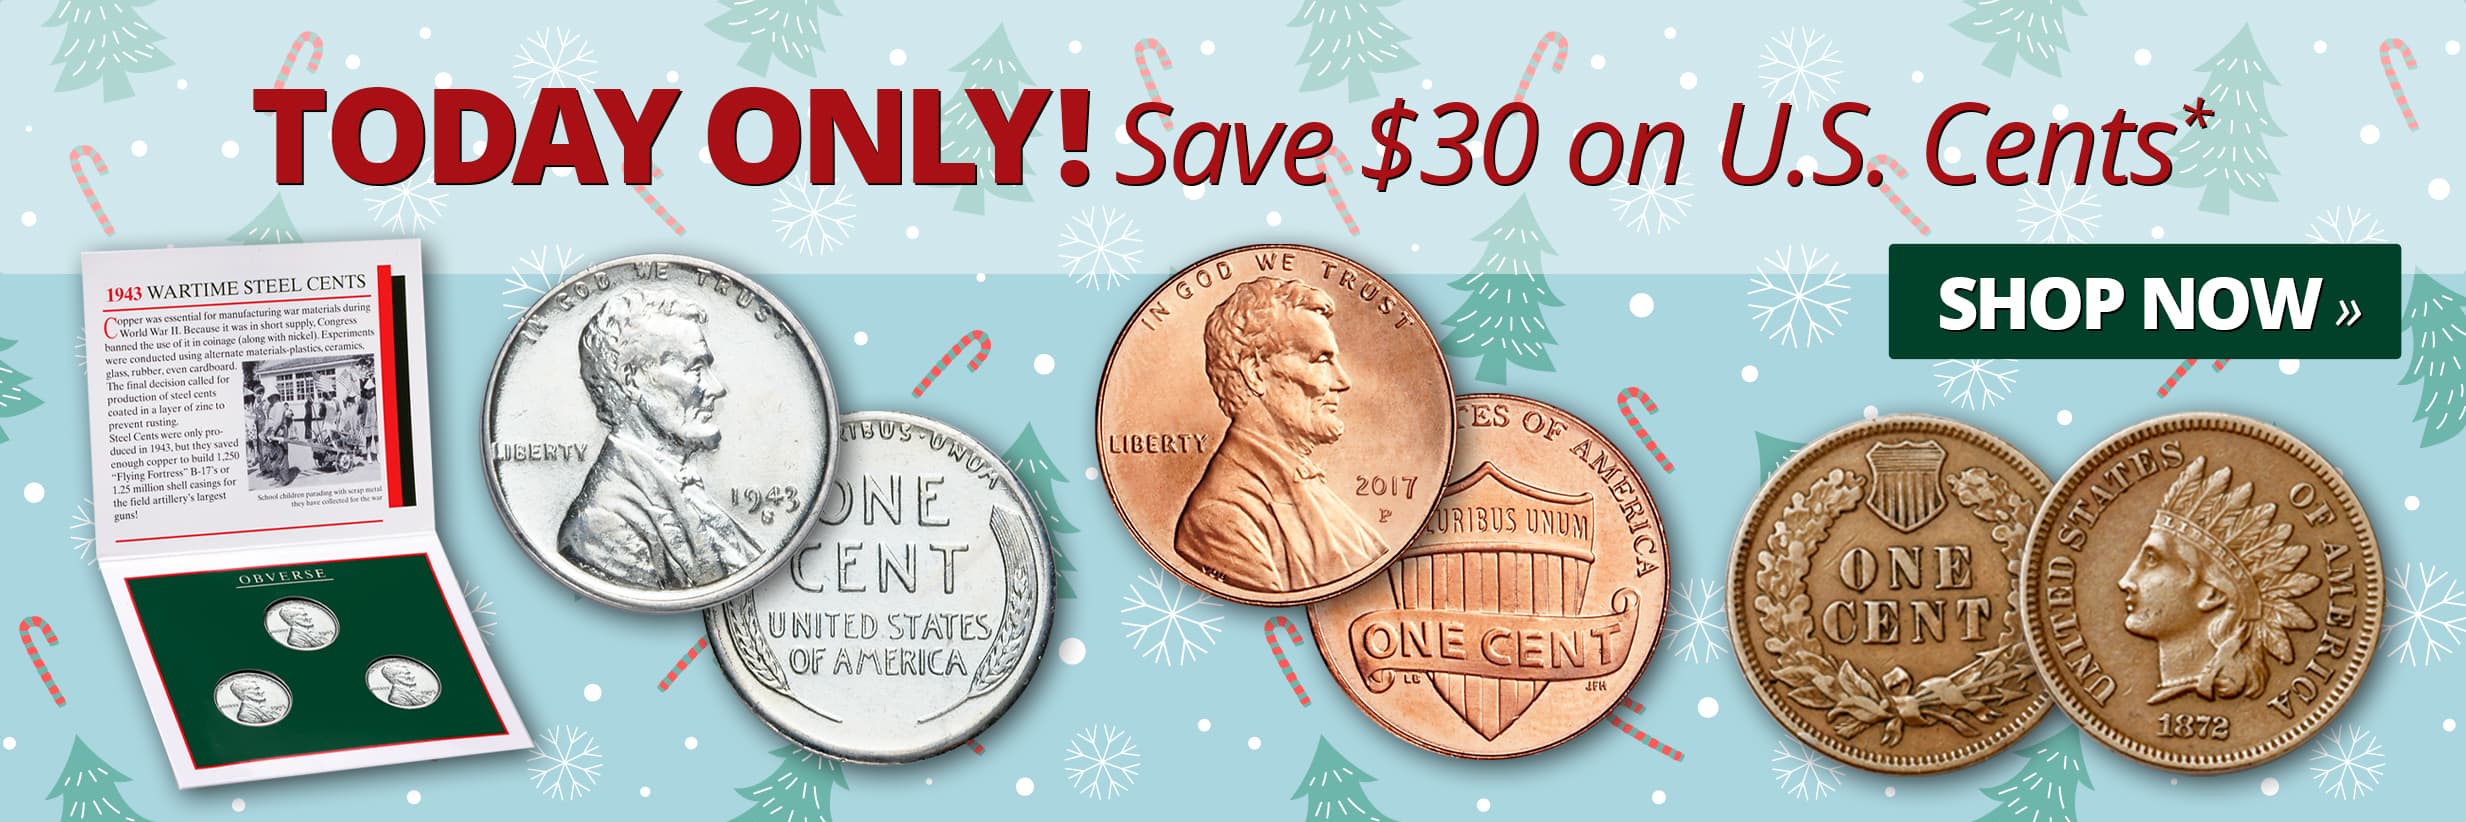 TODAY ONLY! Save $15